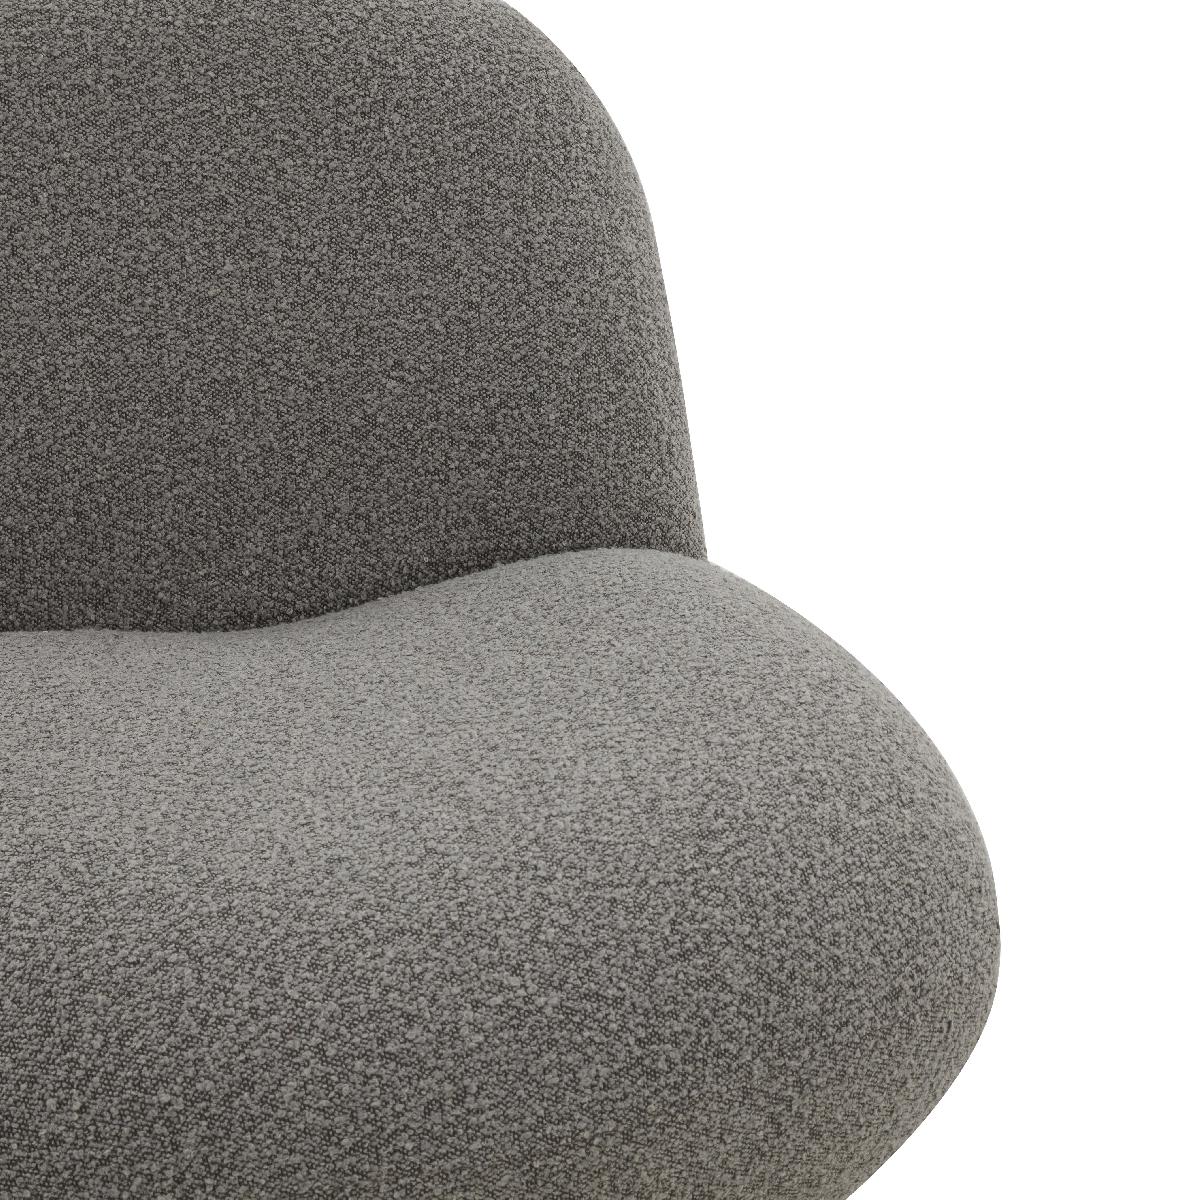 Safavieh Couture Stevie Boucle Accent Chair - Light Grey / Black